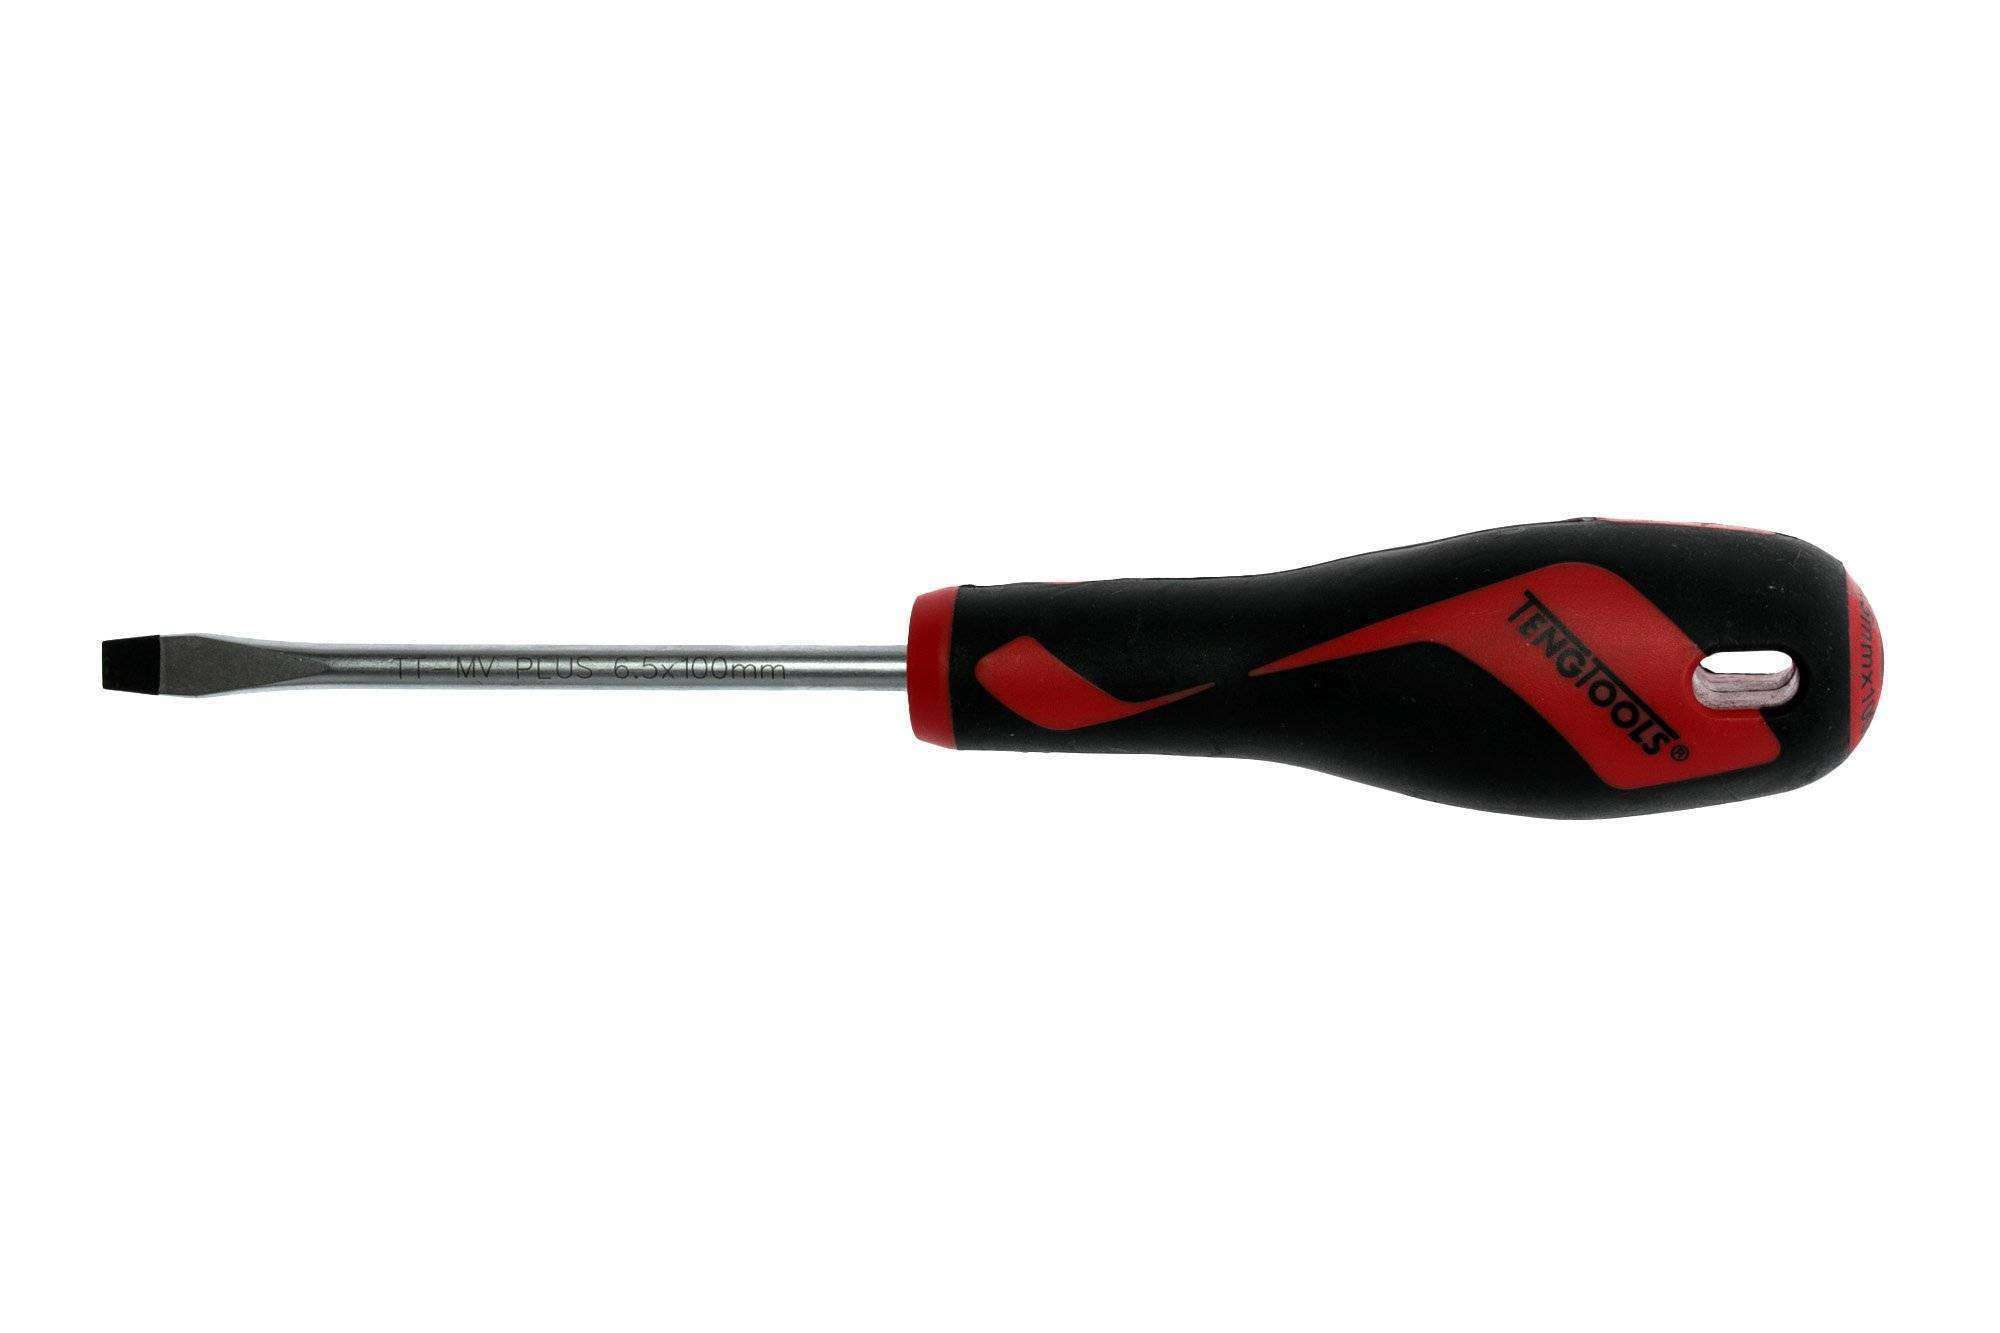 Teng Tools 6.5mm / 1/4 Inch x 100mm / 3.9 Inch Long Flat Type Slotted Head Screwdriver - MD928N1